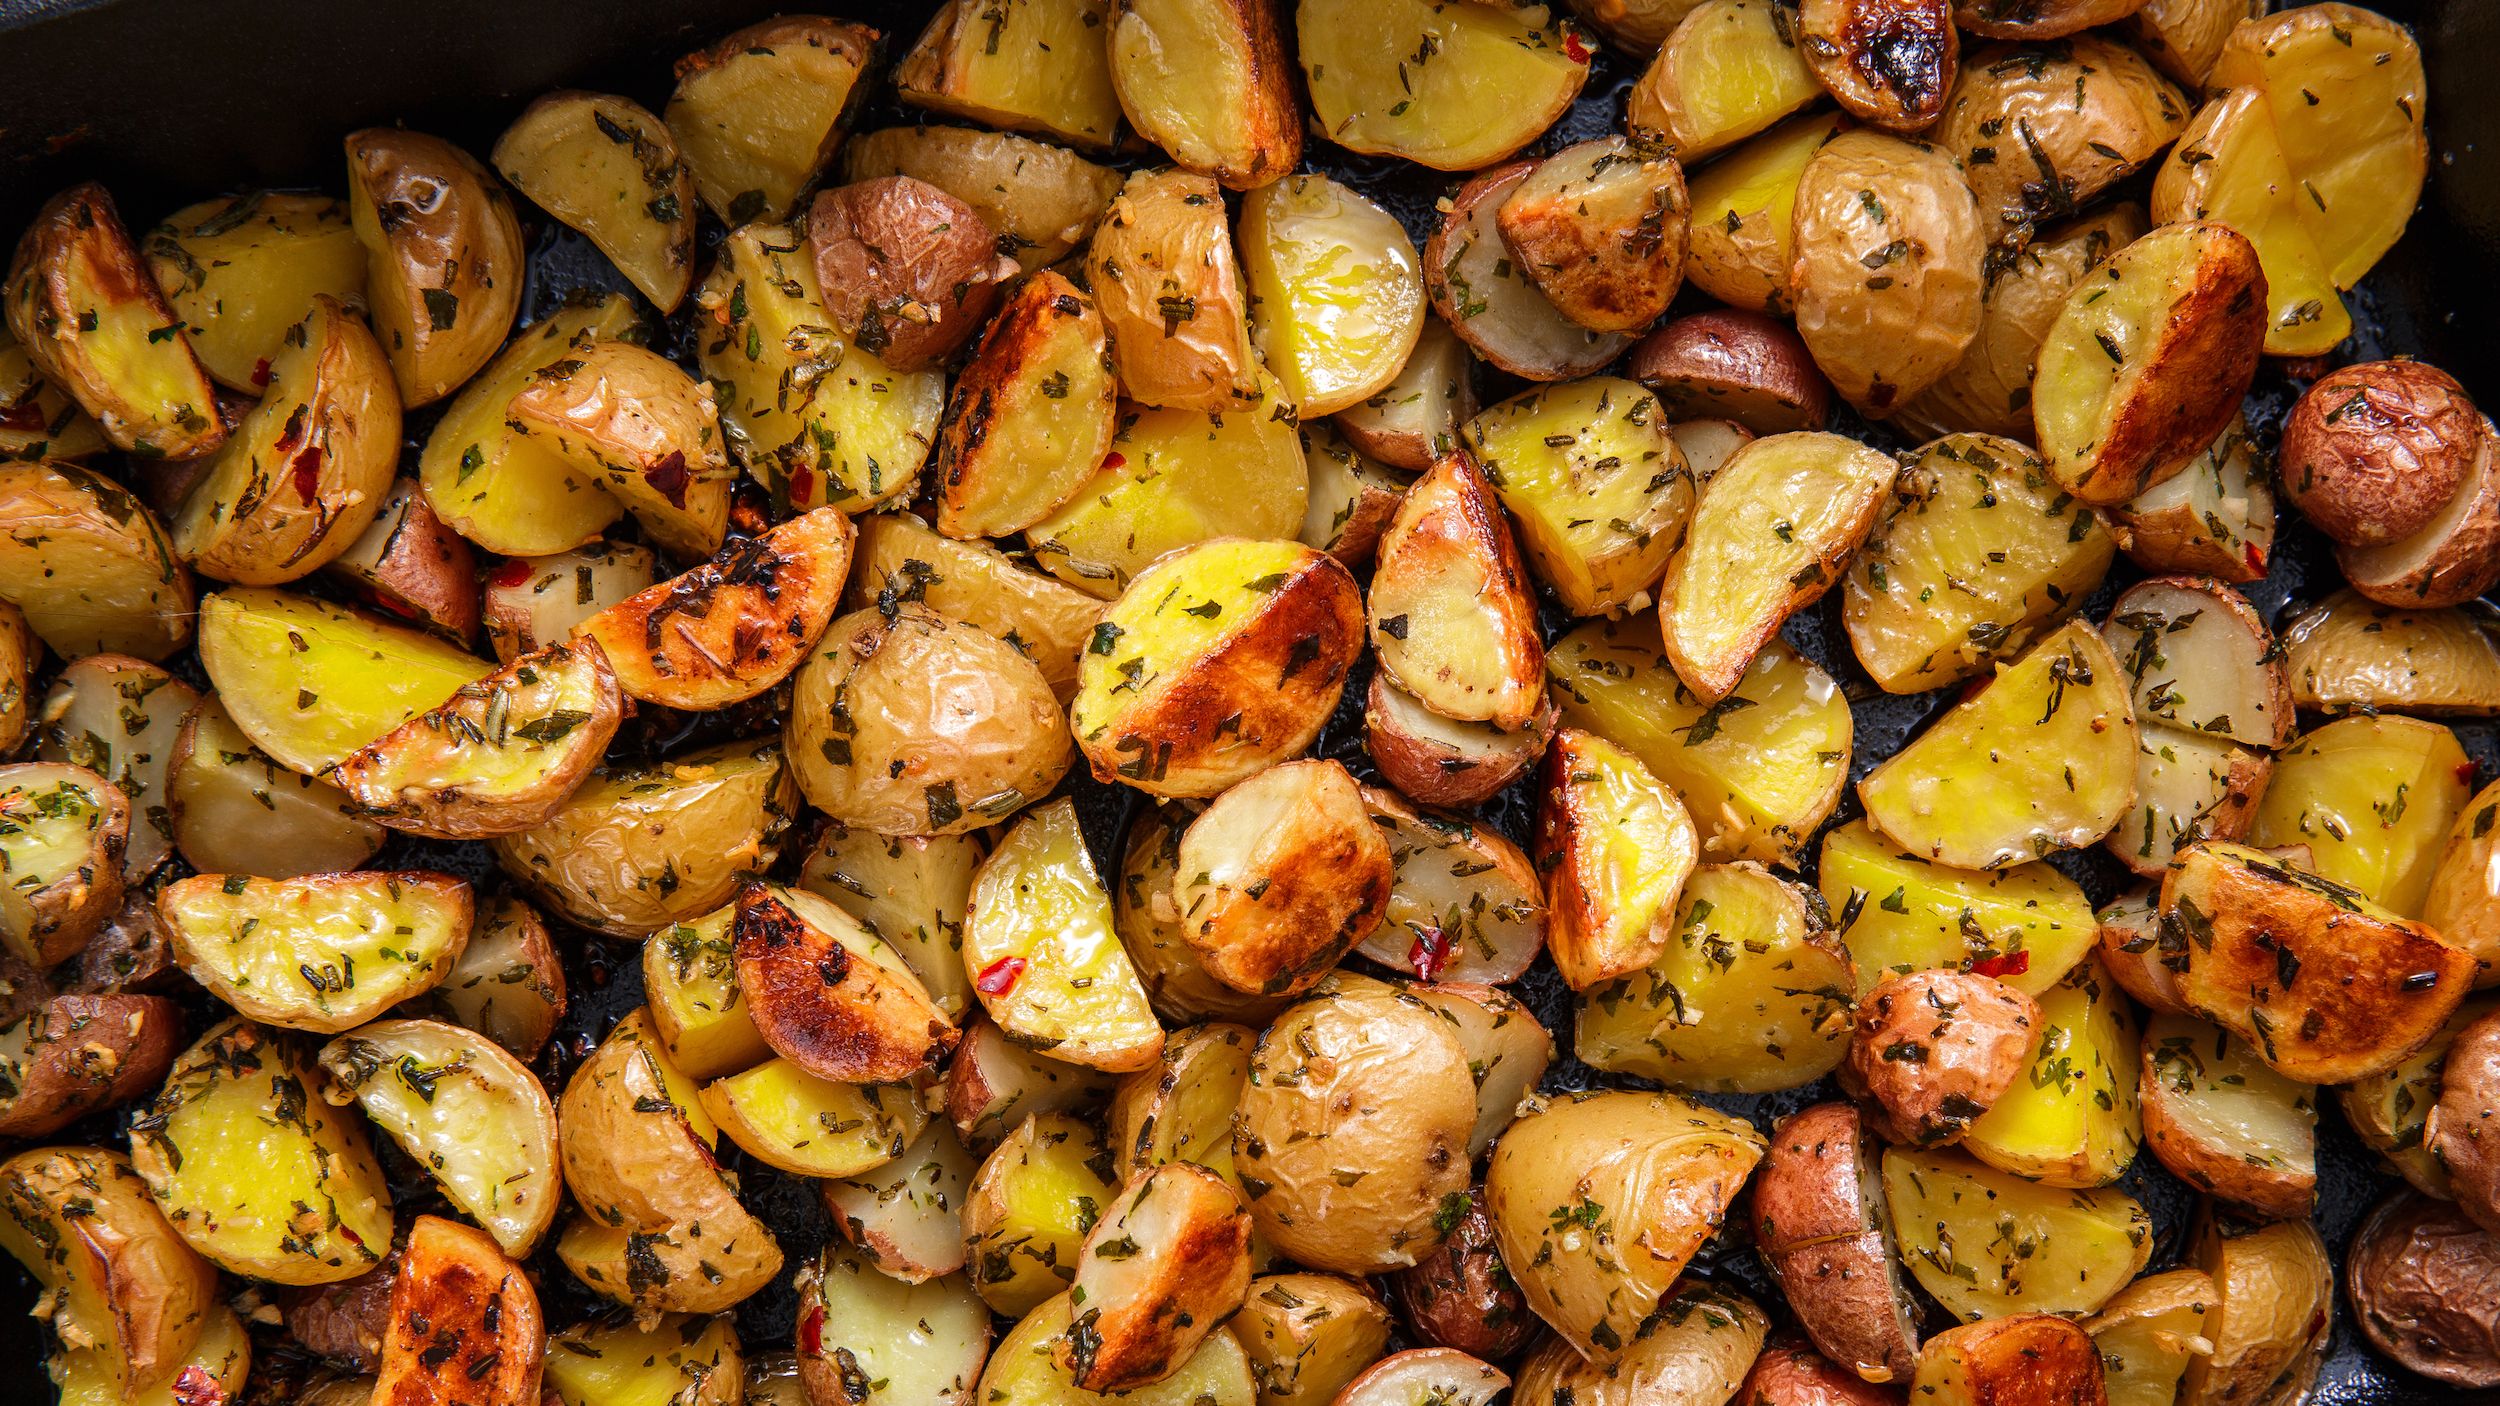 https://hips.hearstapps.com/hmg-prod/images/delish-roasted-potatoes-vertical-1-1540492242.jpg?crop=1xw:0.8435812837432514xh;center,top